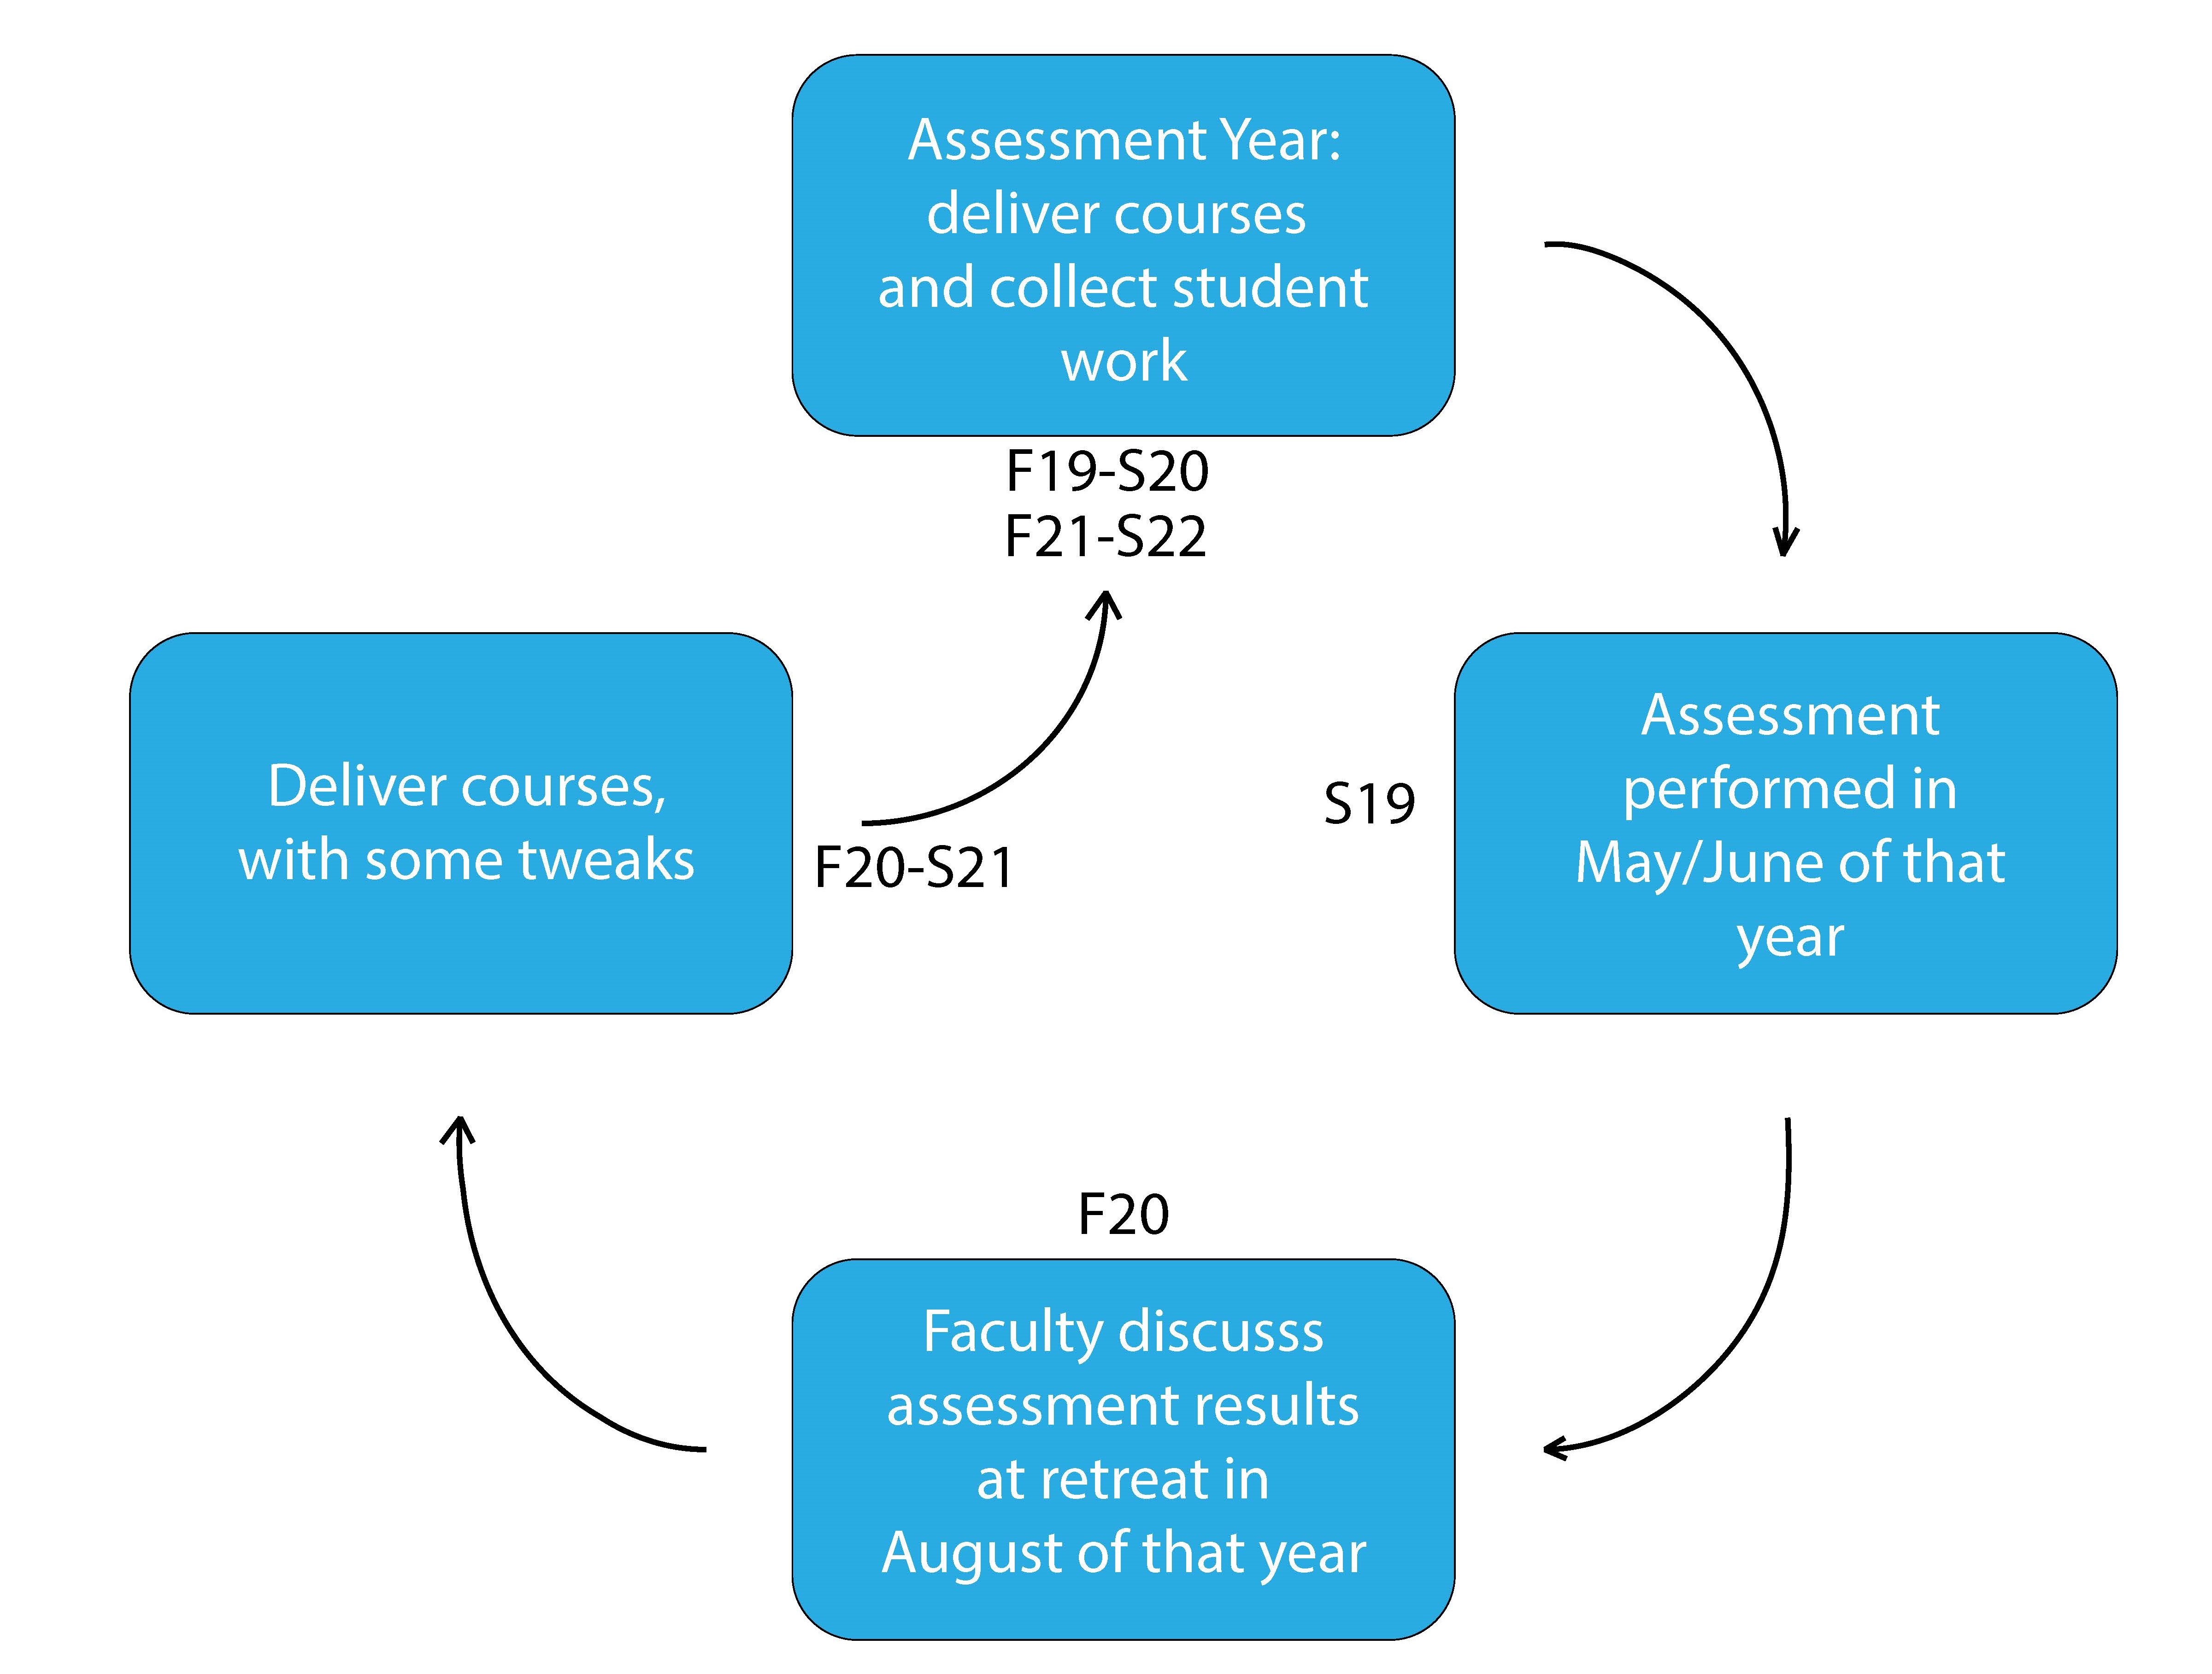 Cycle of assessment. In the first year, a course is delivered and student work is collected. That summer, assessment of the student work is performed in May or June. The results of the assessment are shared with faculty at the annual general education retreat, and faculty determine what the data mean and any changes that need to be made. The cycle repeates every two years.